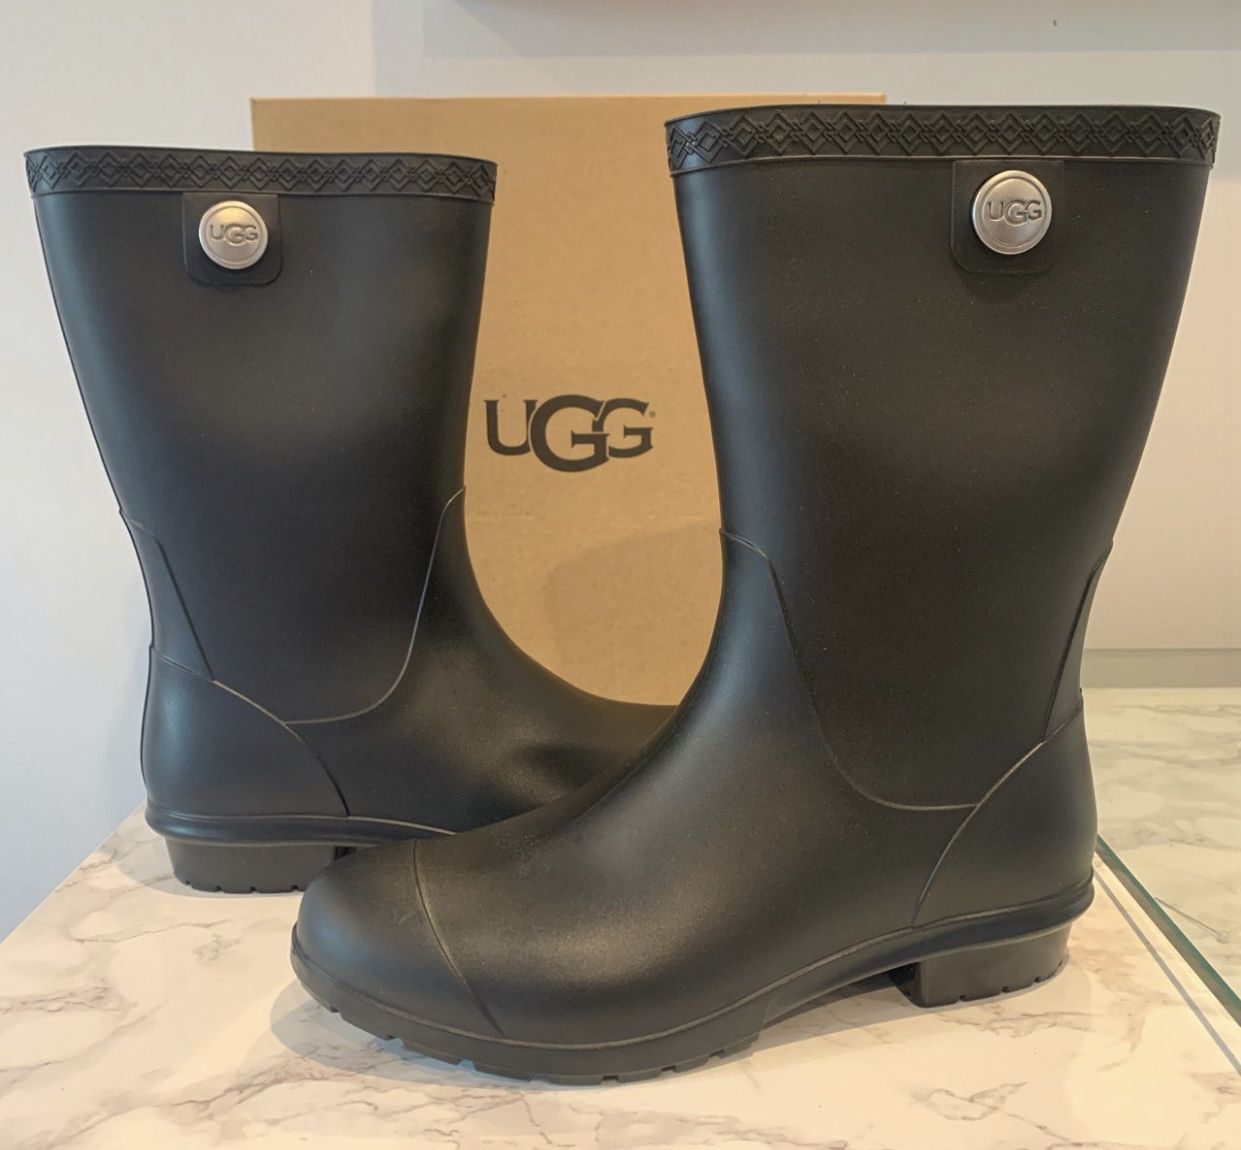 Size 7 Black UGG classic rain boots. Worn Once.